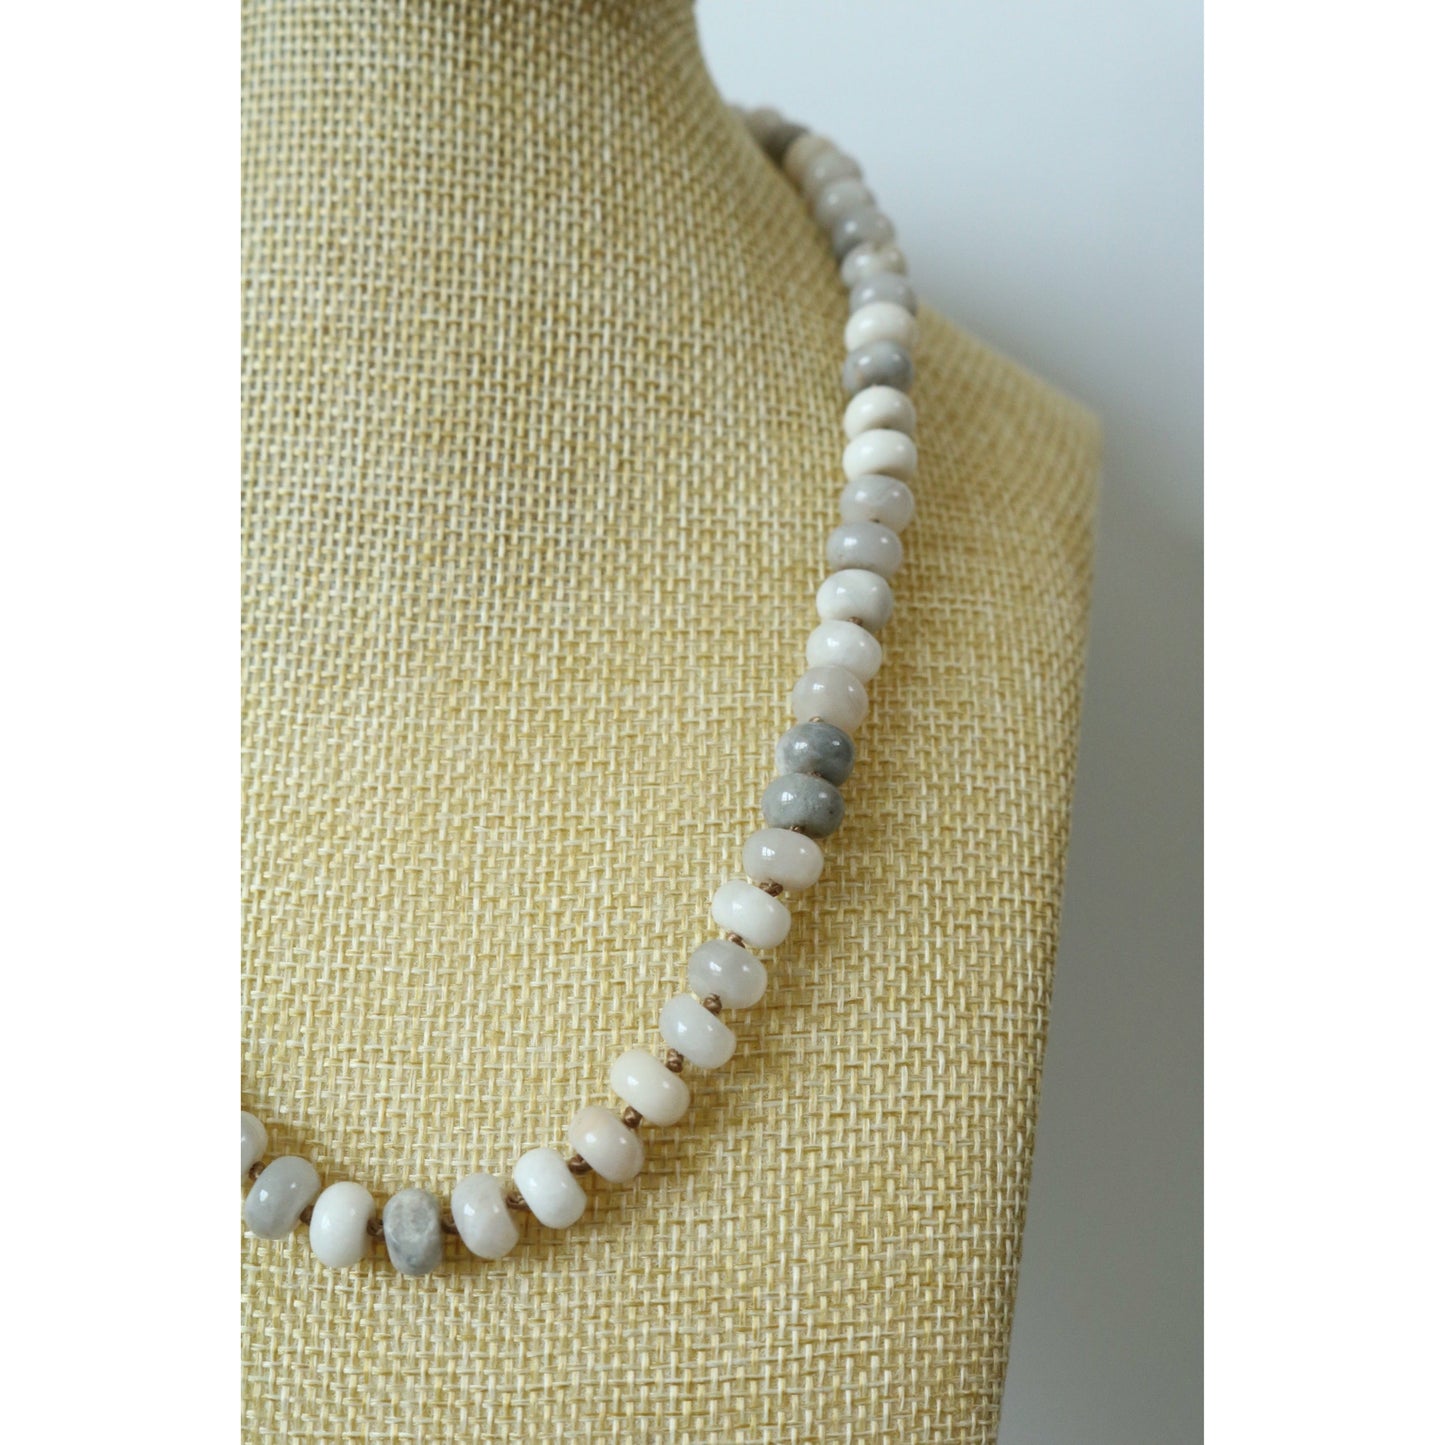 White Lace Agate Hand Knotted Candy Crush Necklace